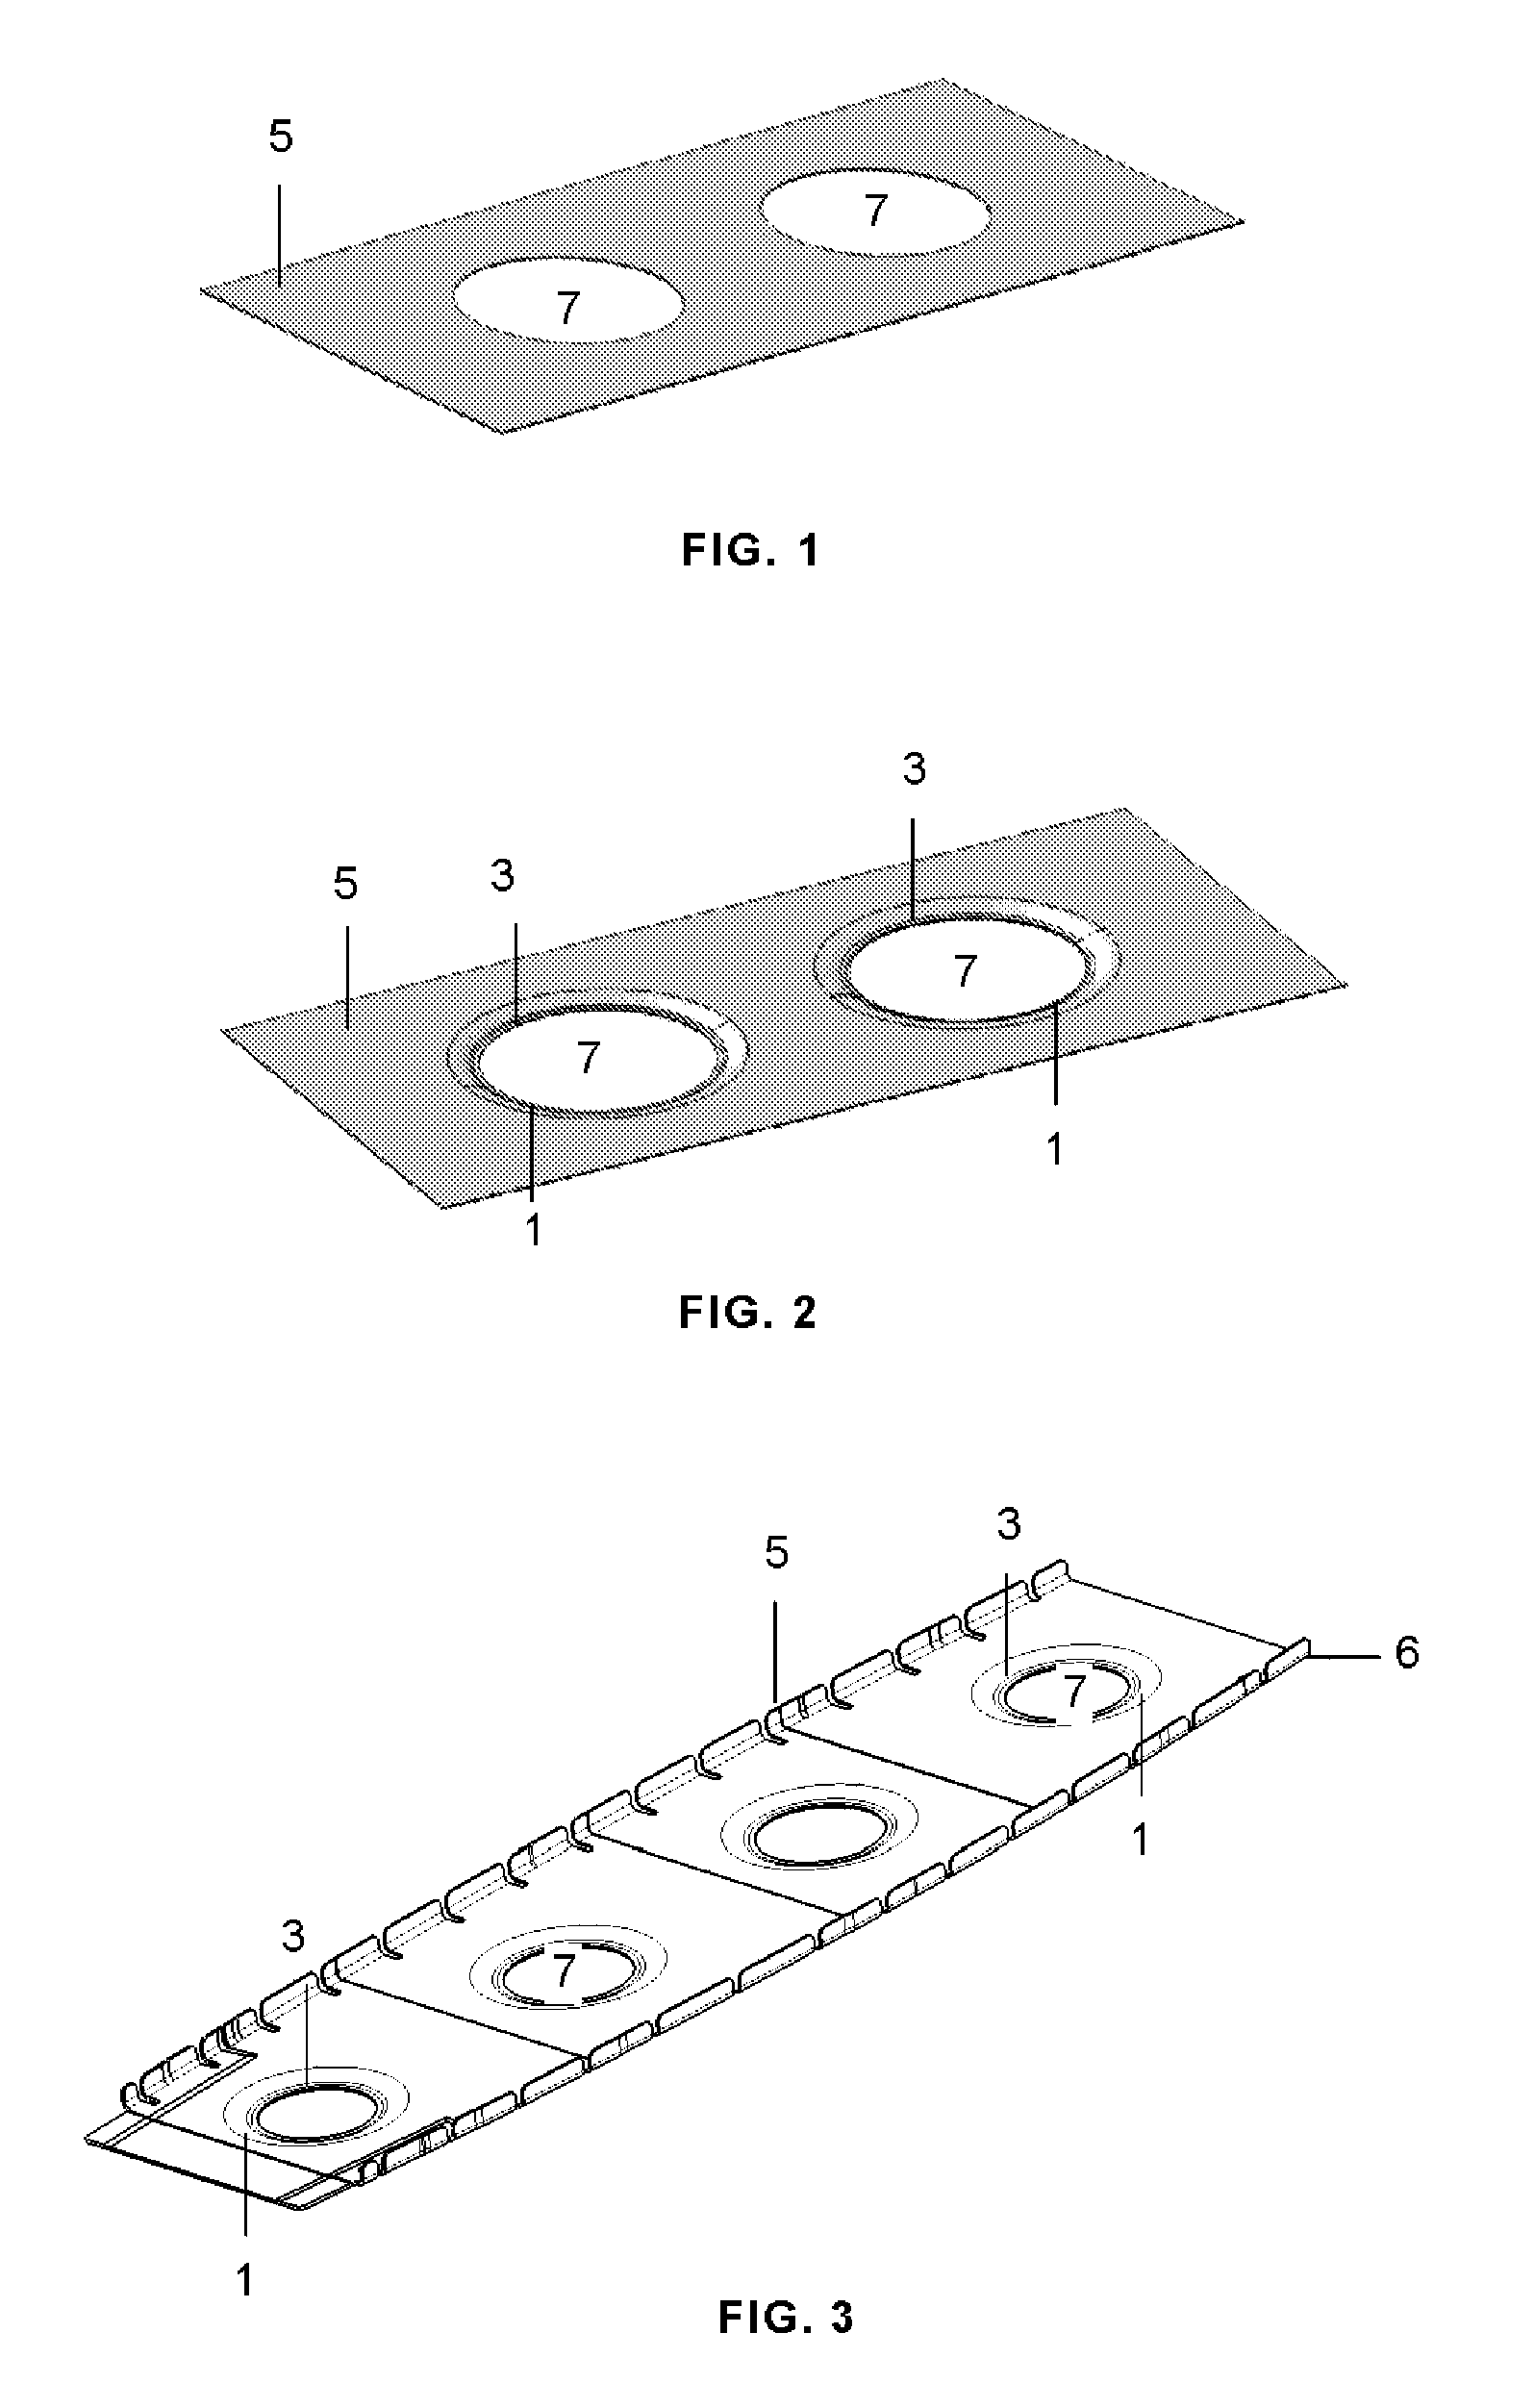 Process for making swaged lighting holes in planar areas of preimpregnated composite parts